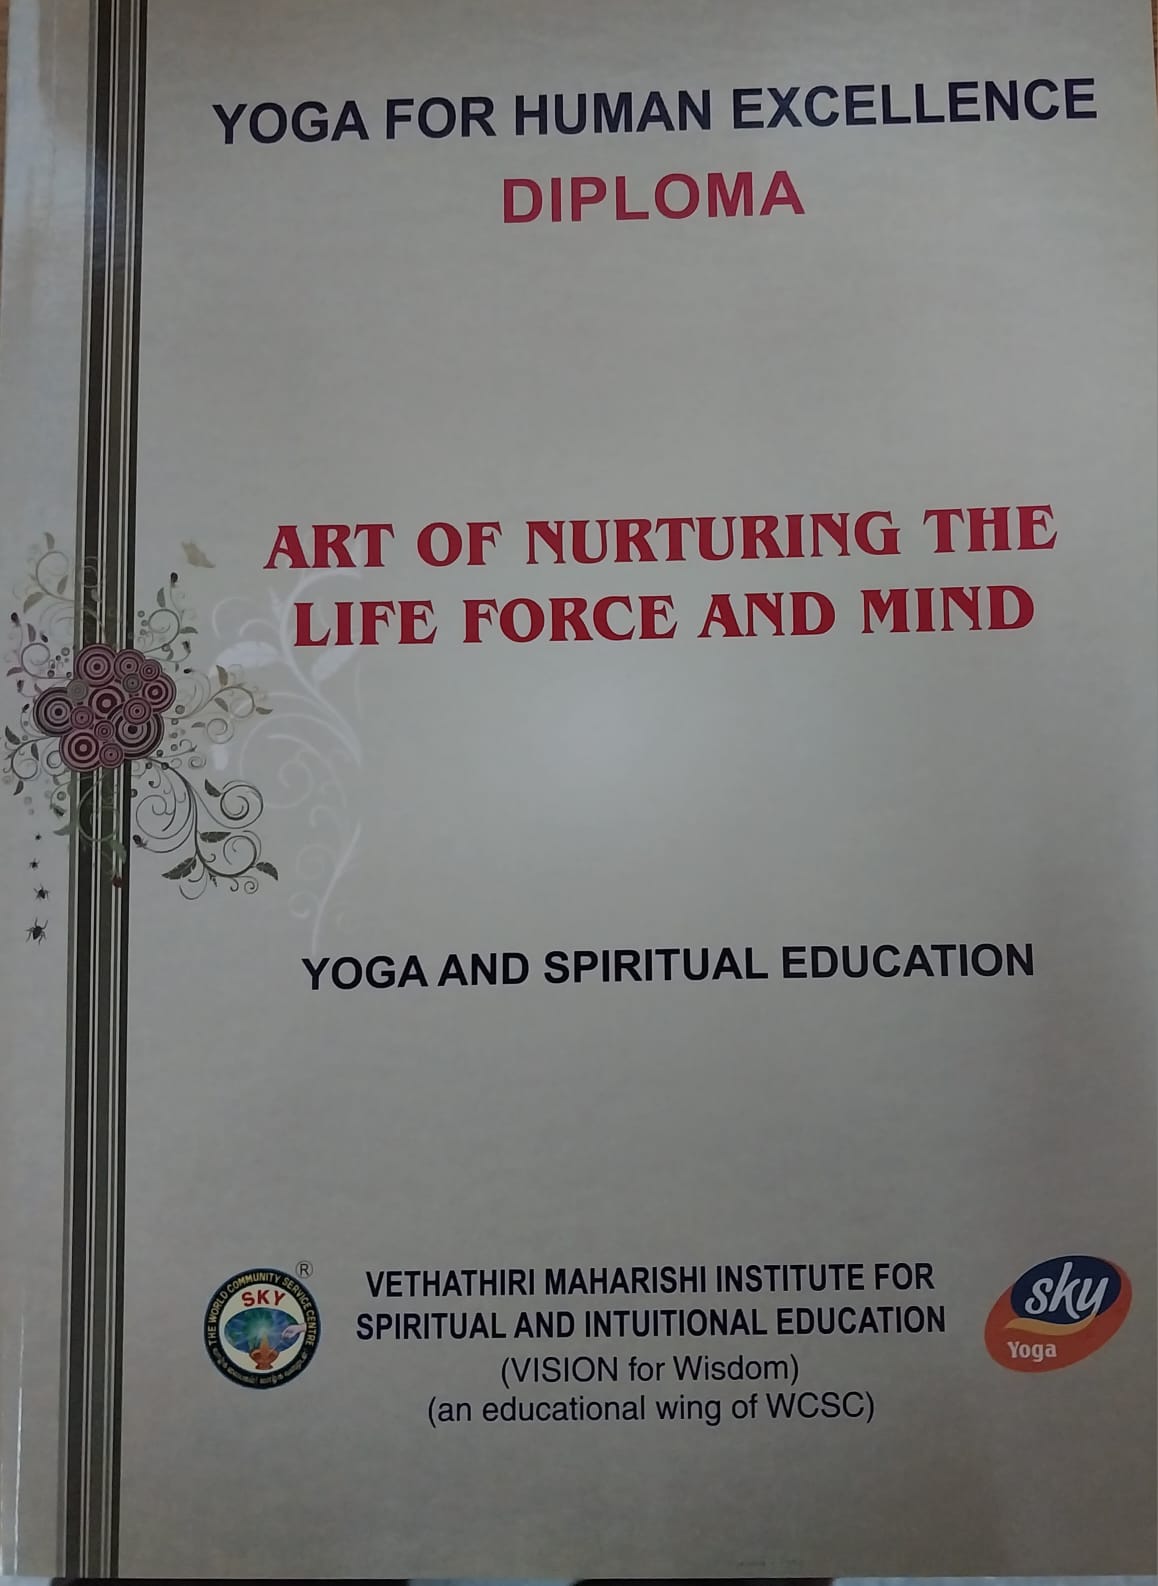 Art of Nurturing the life force and mind - English Diploma Books ...